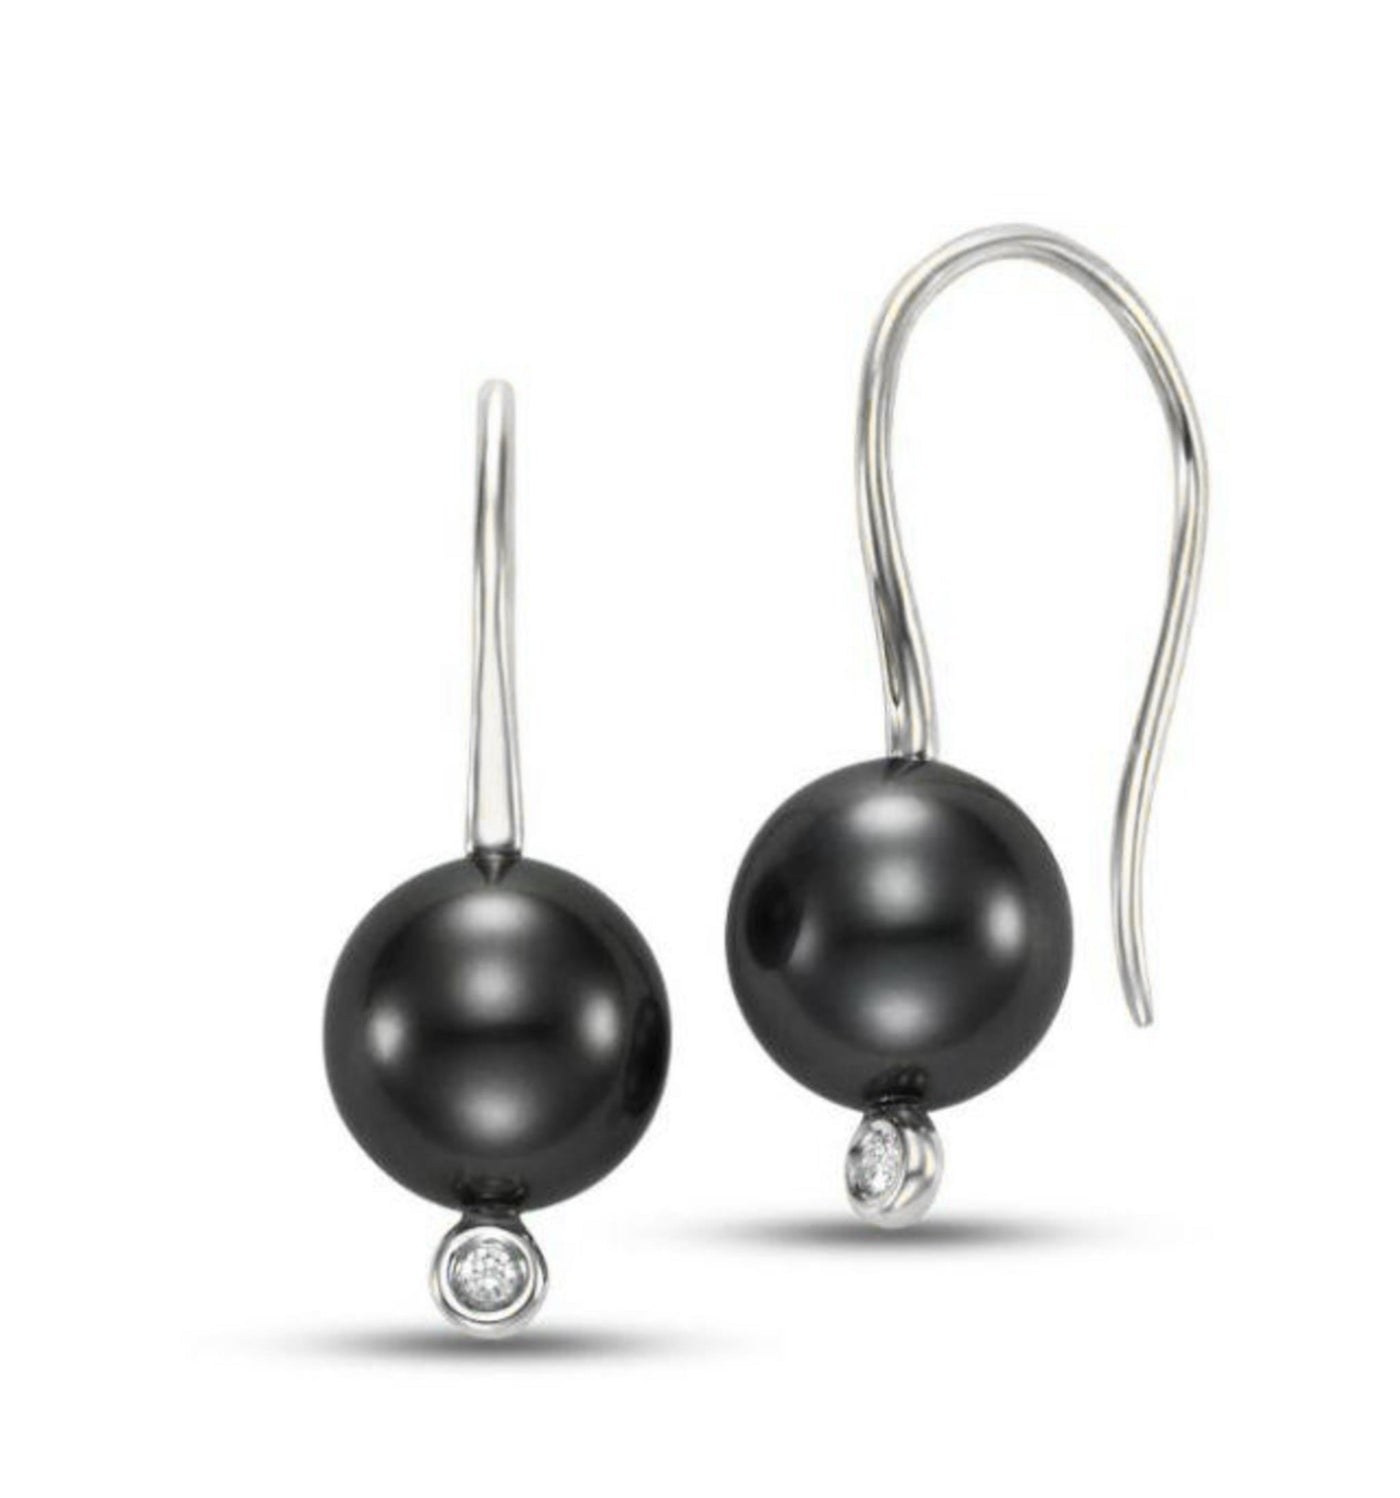 14K White Gold .02ctw Drop Style Earrings Featuring Tahitian Cultured Pearls and Diamonds